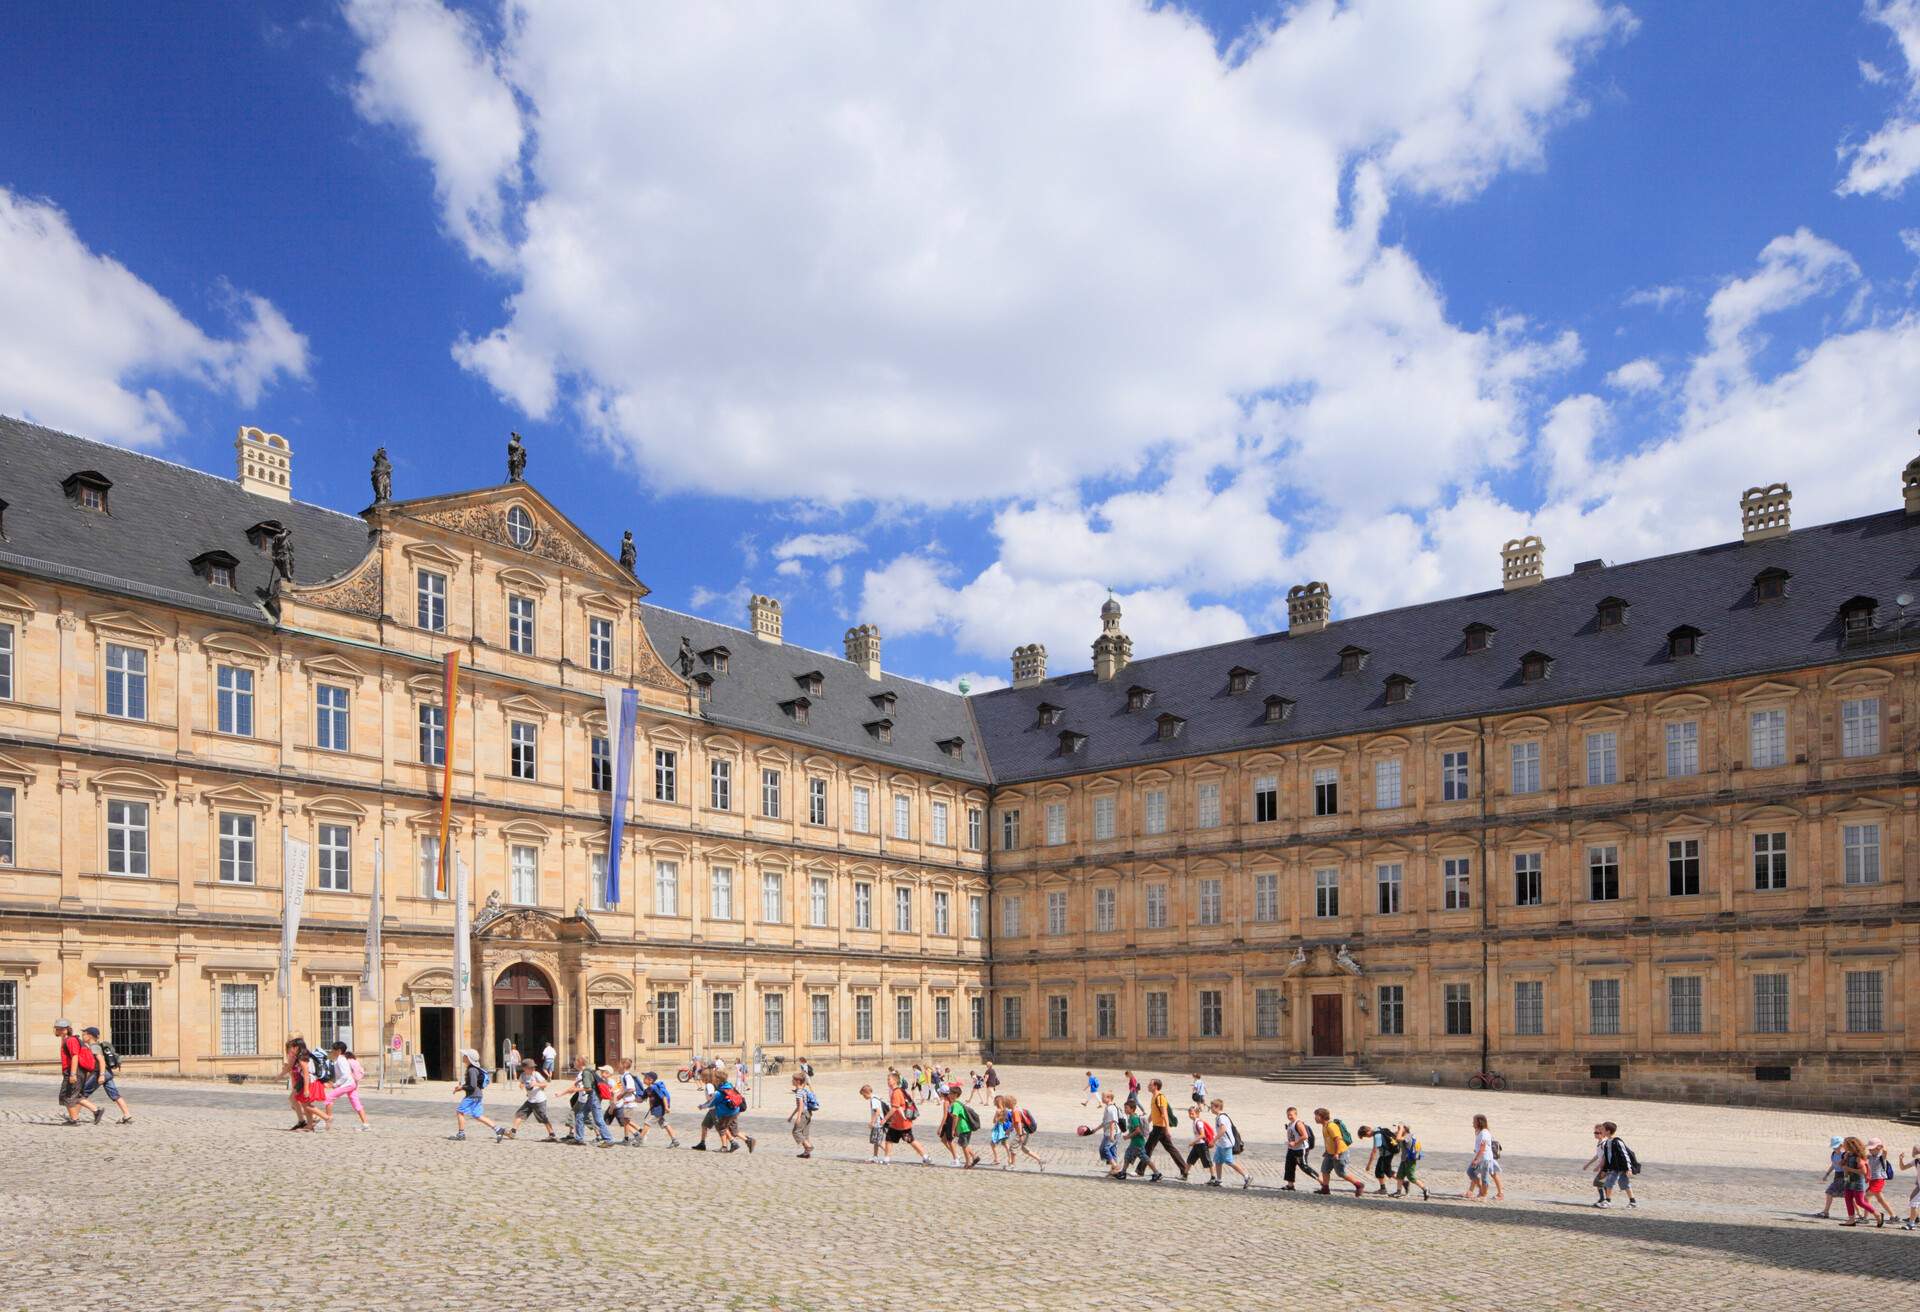 DEST_GERMANY_BAMBERG_NEUE_RESIDENZ_GettyImages-138707883